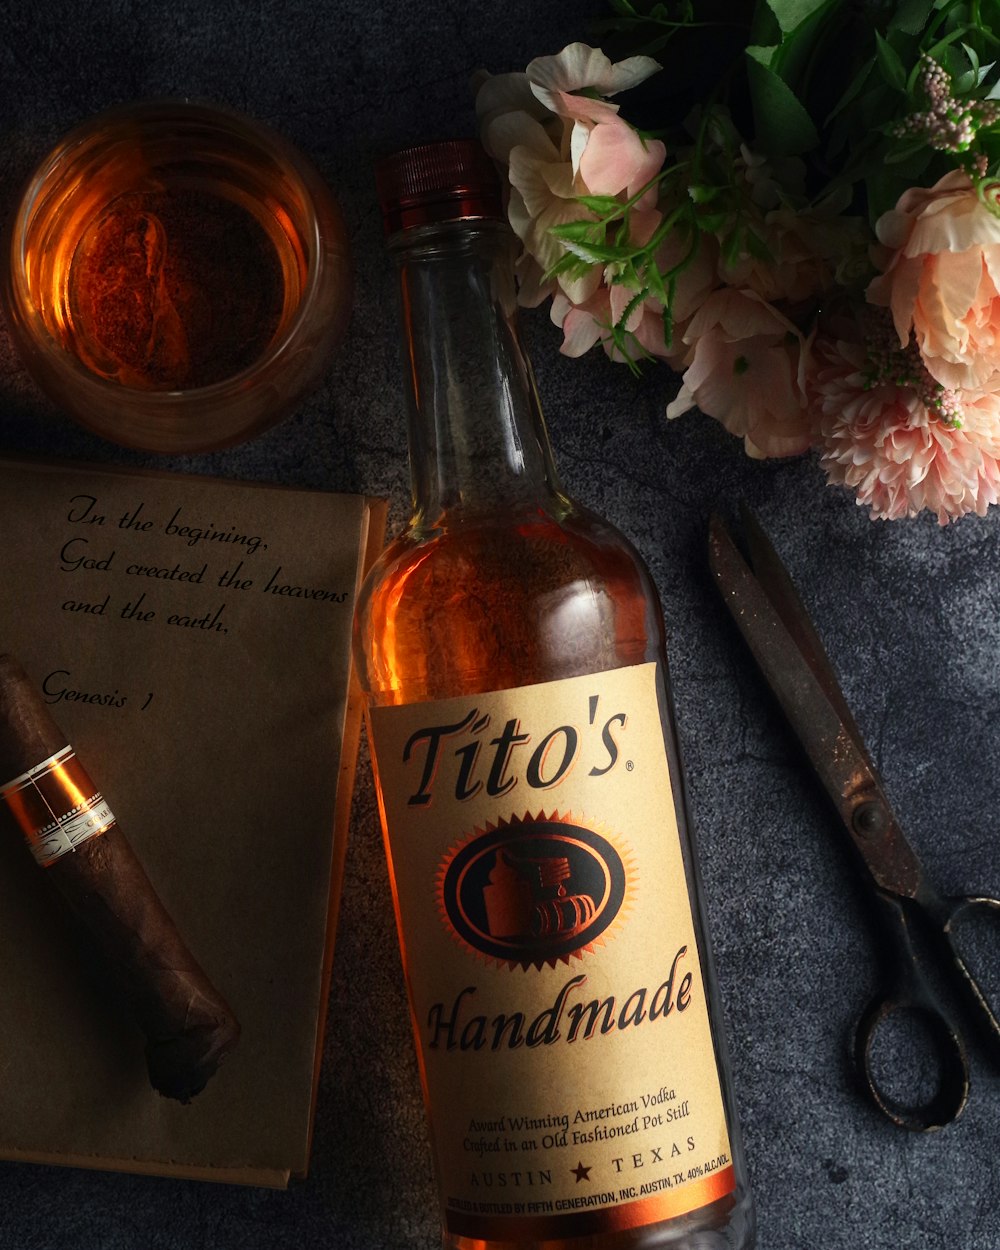 a bottle of tito's handmade cigar next to a pair of scissors